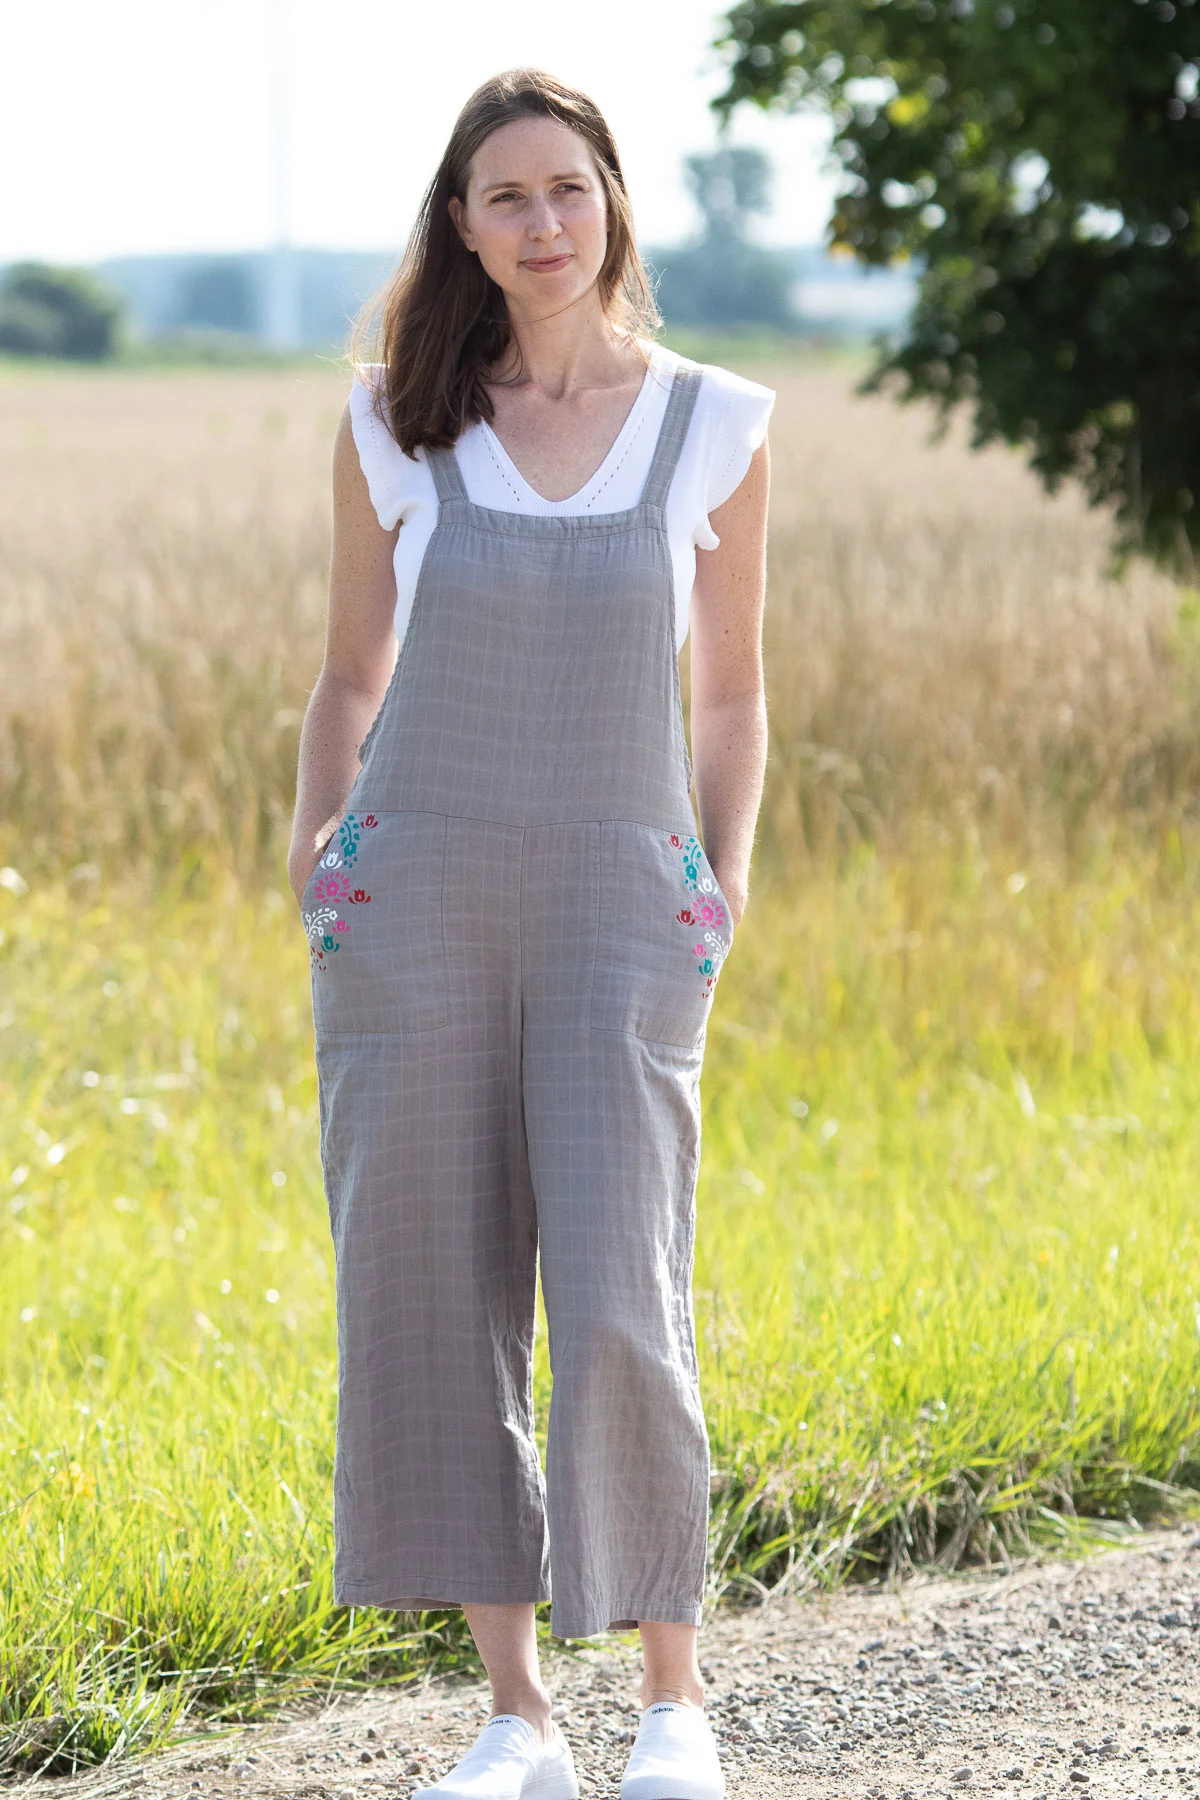 Personalizing Cotton Jumpsuits for Women with Cricut – Sustain My